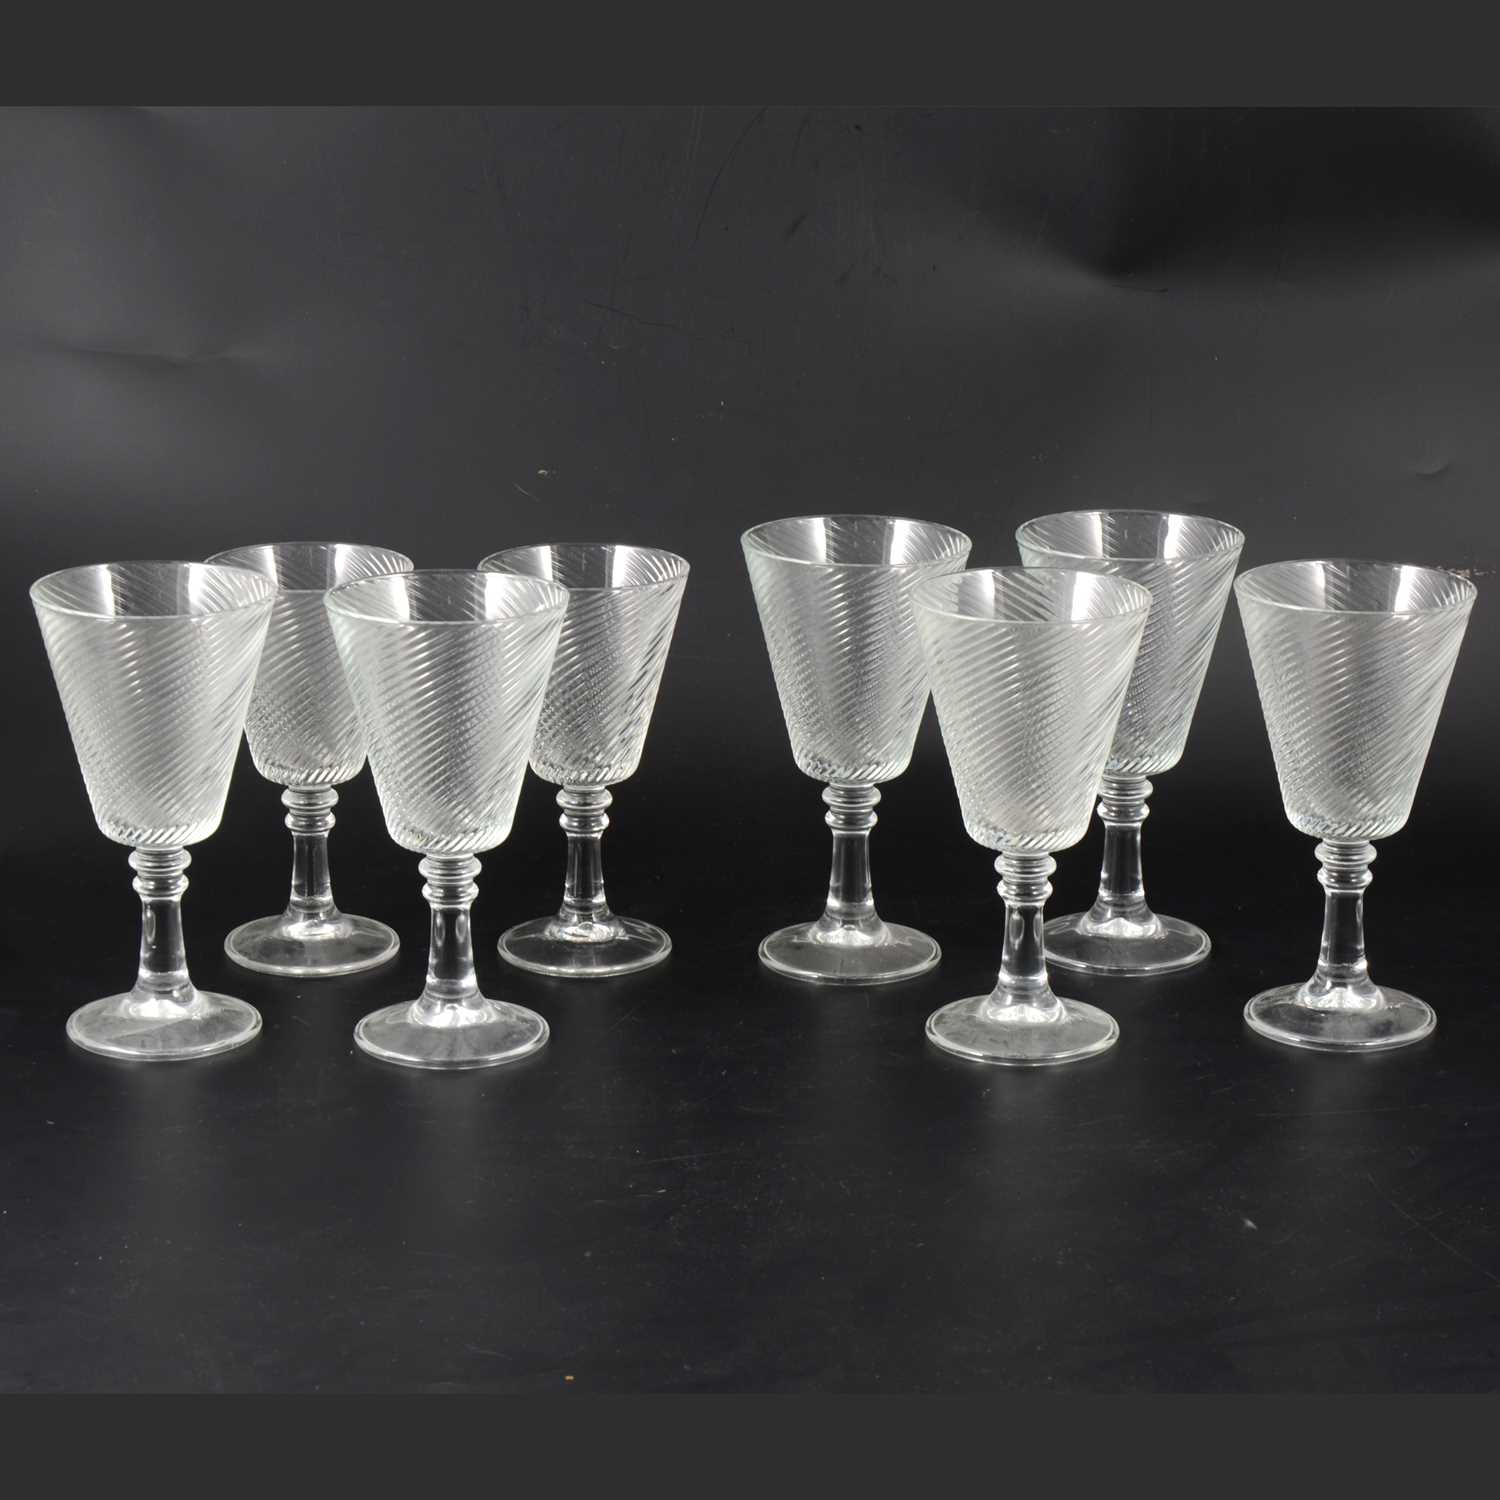 Lot 1013 - Six large wine glasses with spiralled bowls, and two similar smaller glasses